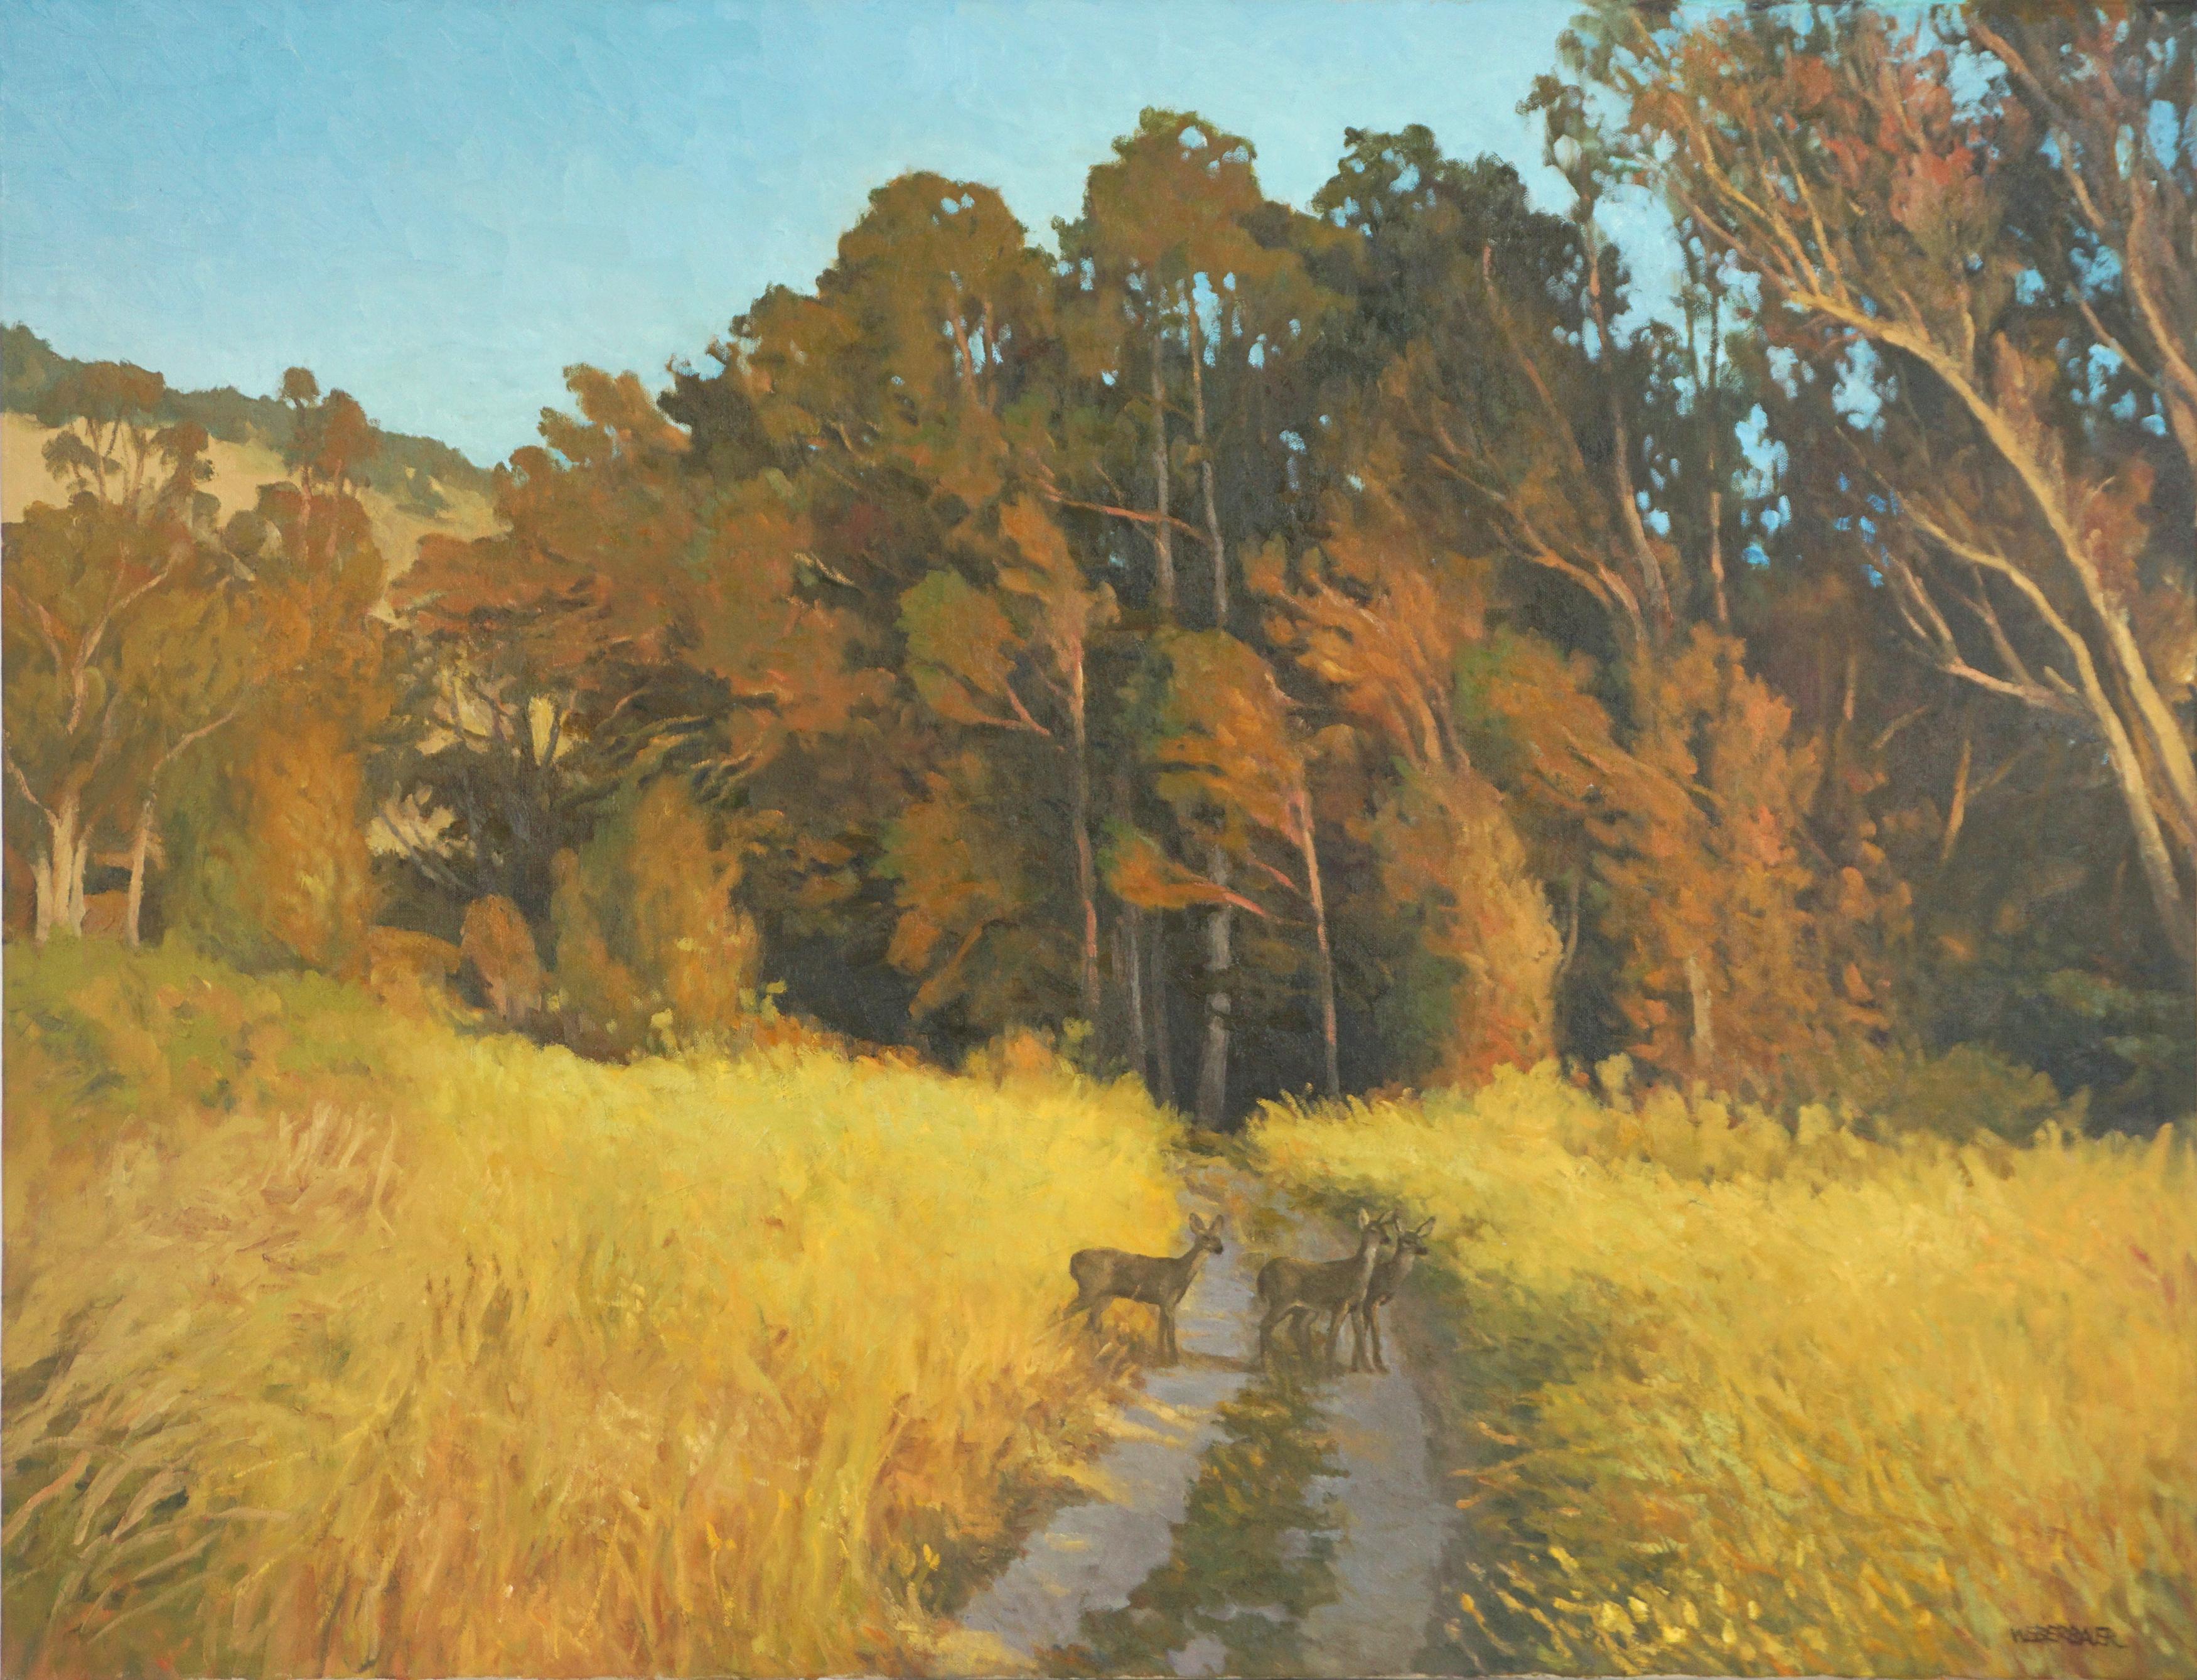 Wayne Weberbauer Landscape Painting - Carmel Valley, California Autumnal Landscape with Deer in Meadow